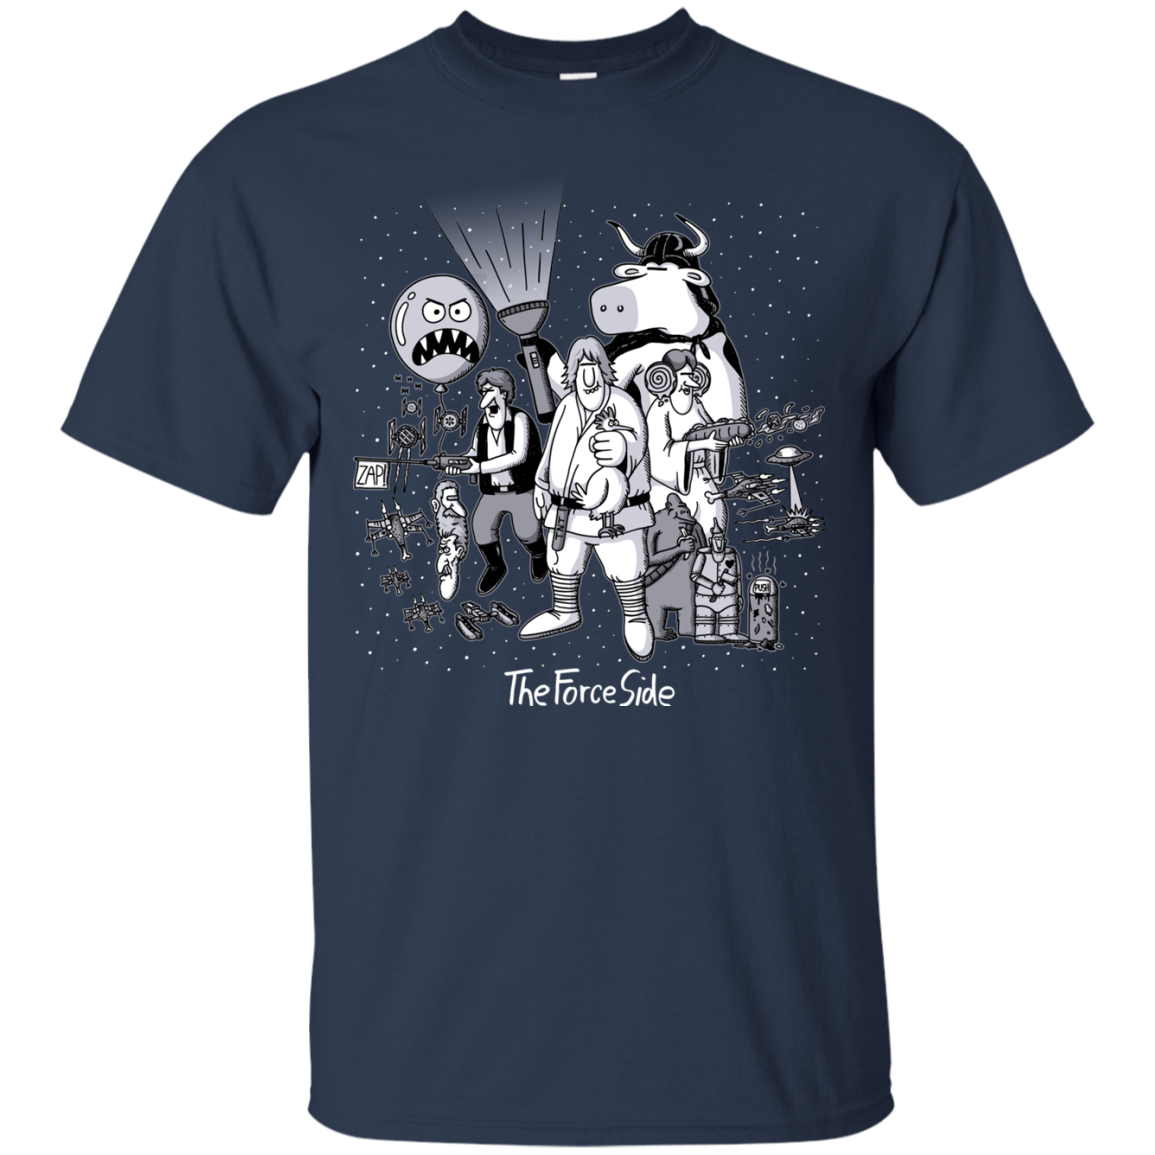 The Force Side T-Shirt